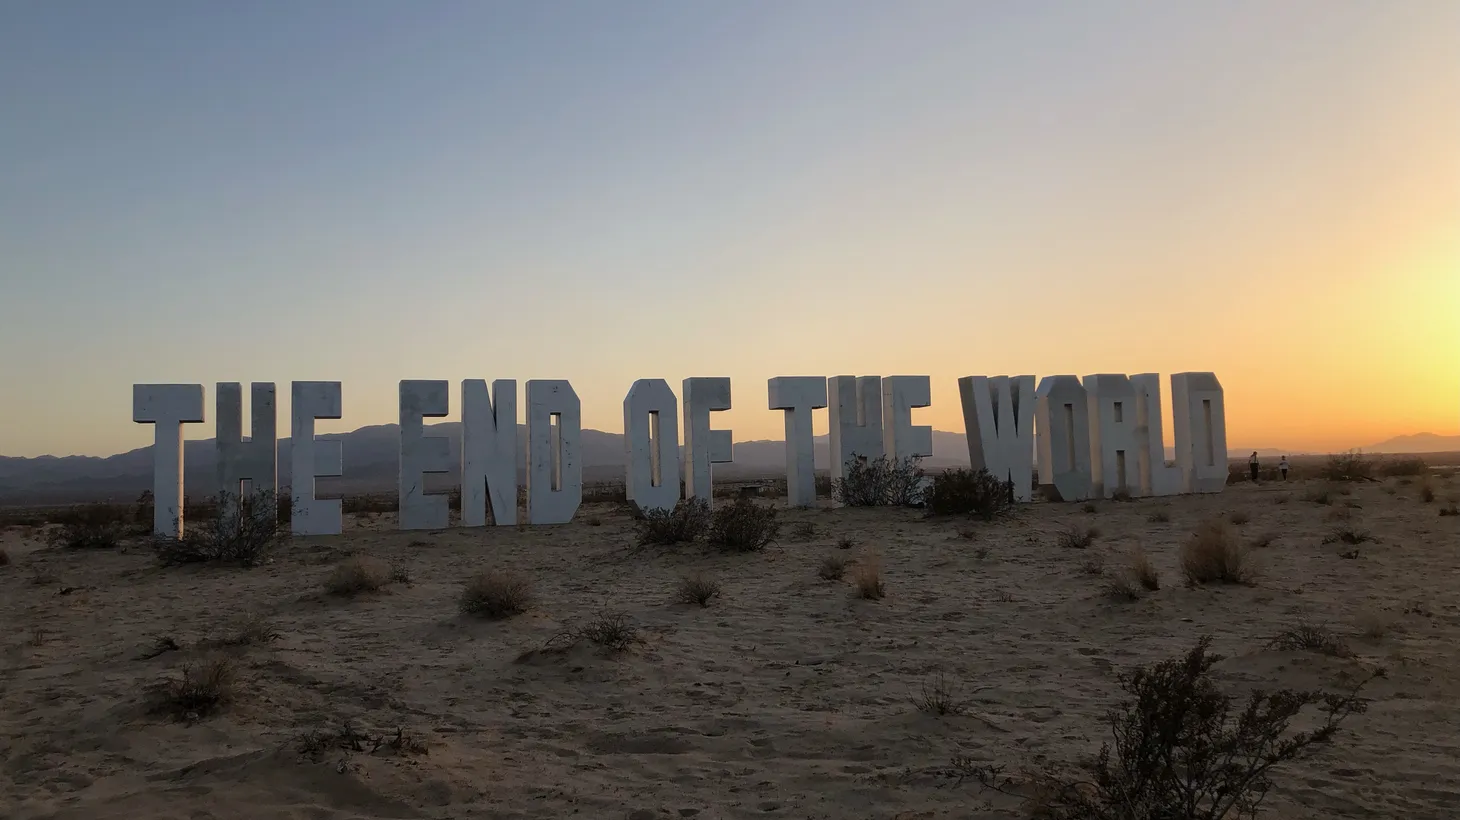 Jack Pierson’s wooden words “The End of the World” is now displayed in the Mojave Desert, along with work by eight other artists as part of “The Searchers” exhibit.